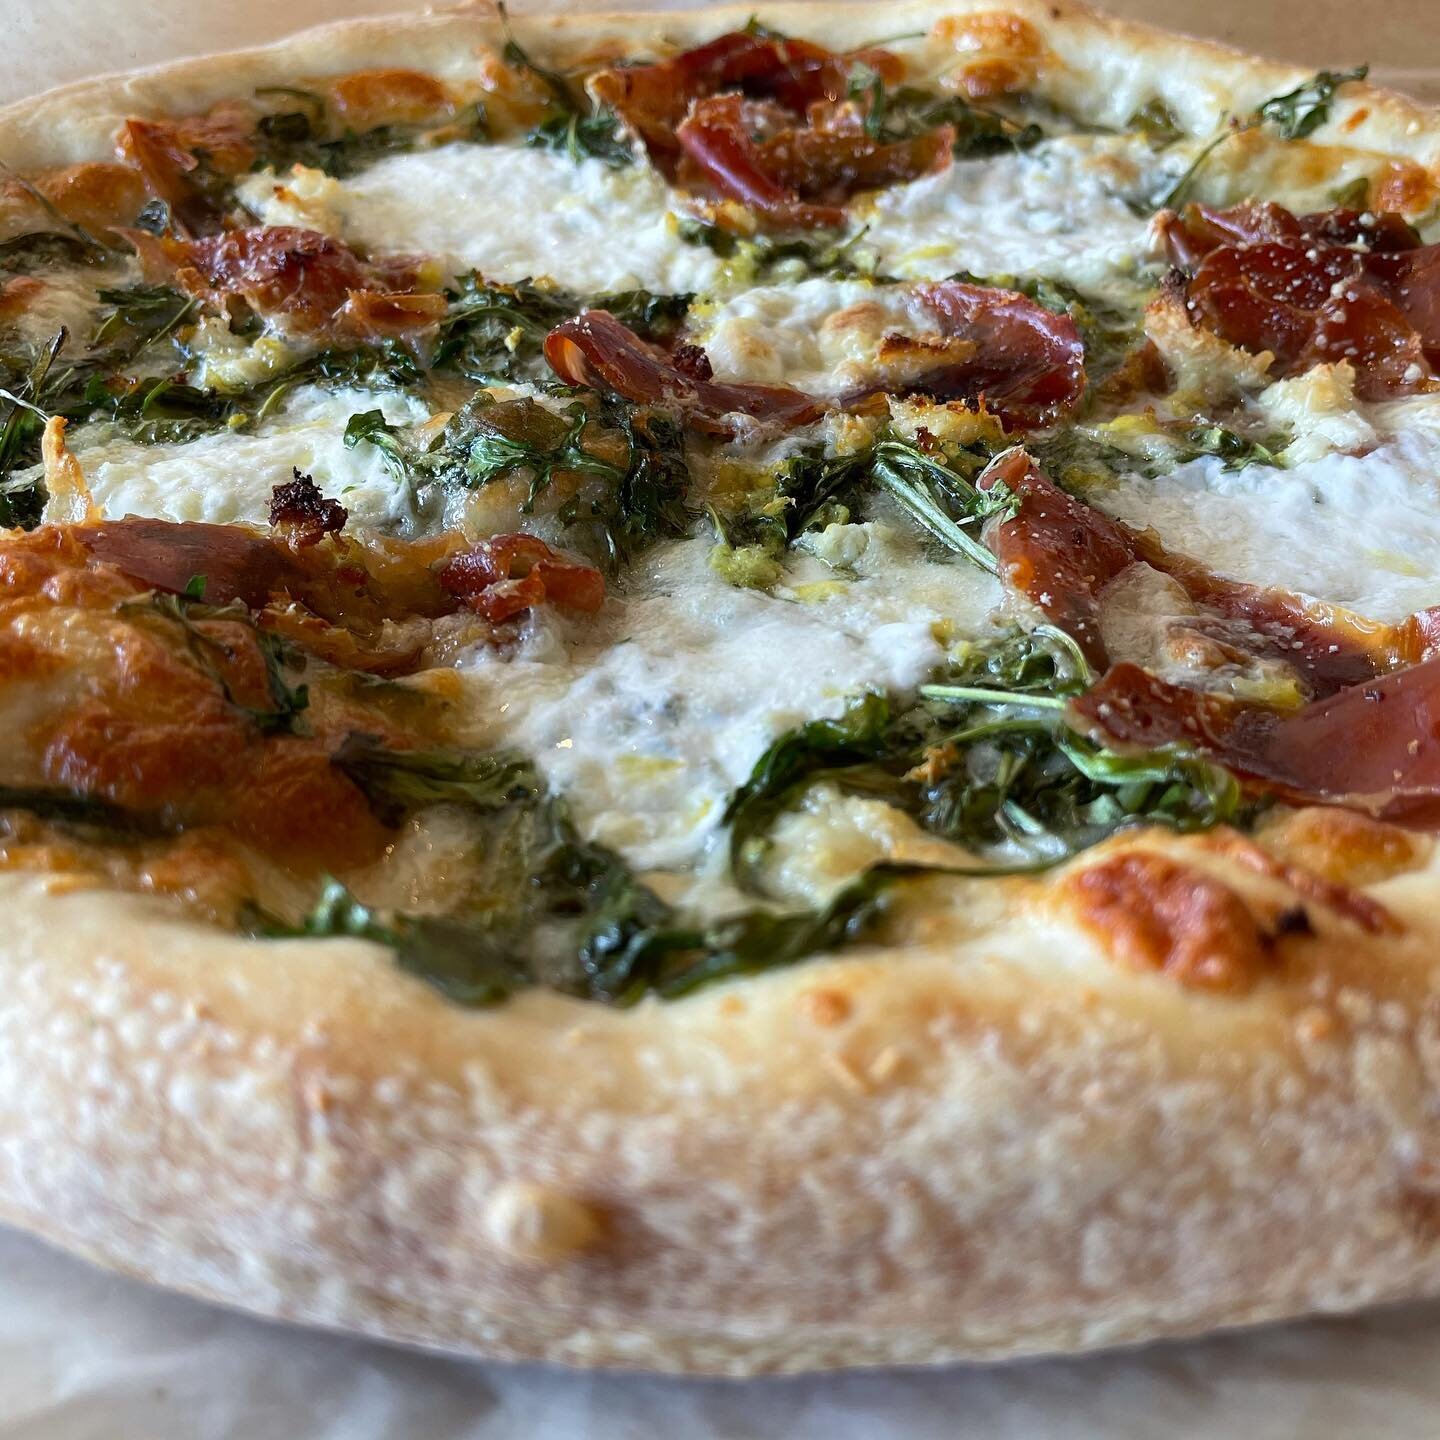 What do you get when you put crisp arugula, shaved prosciutto, creamy burrata and organic lemon zest together atop the best eat-at-home pizza in town? The Shandy - coming soon! Time to wake up your Spring taste buds. They&rsquo;re gonna love this!